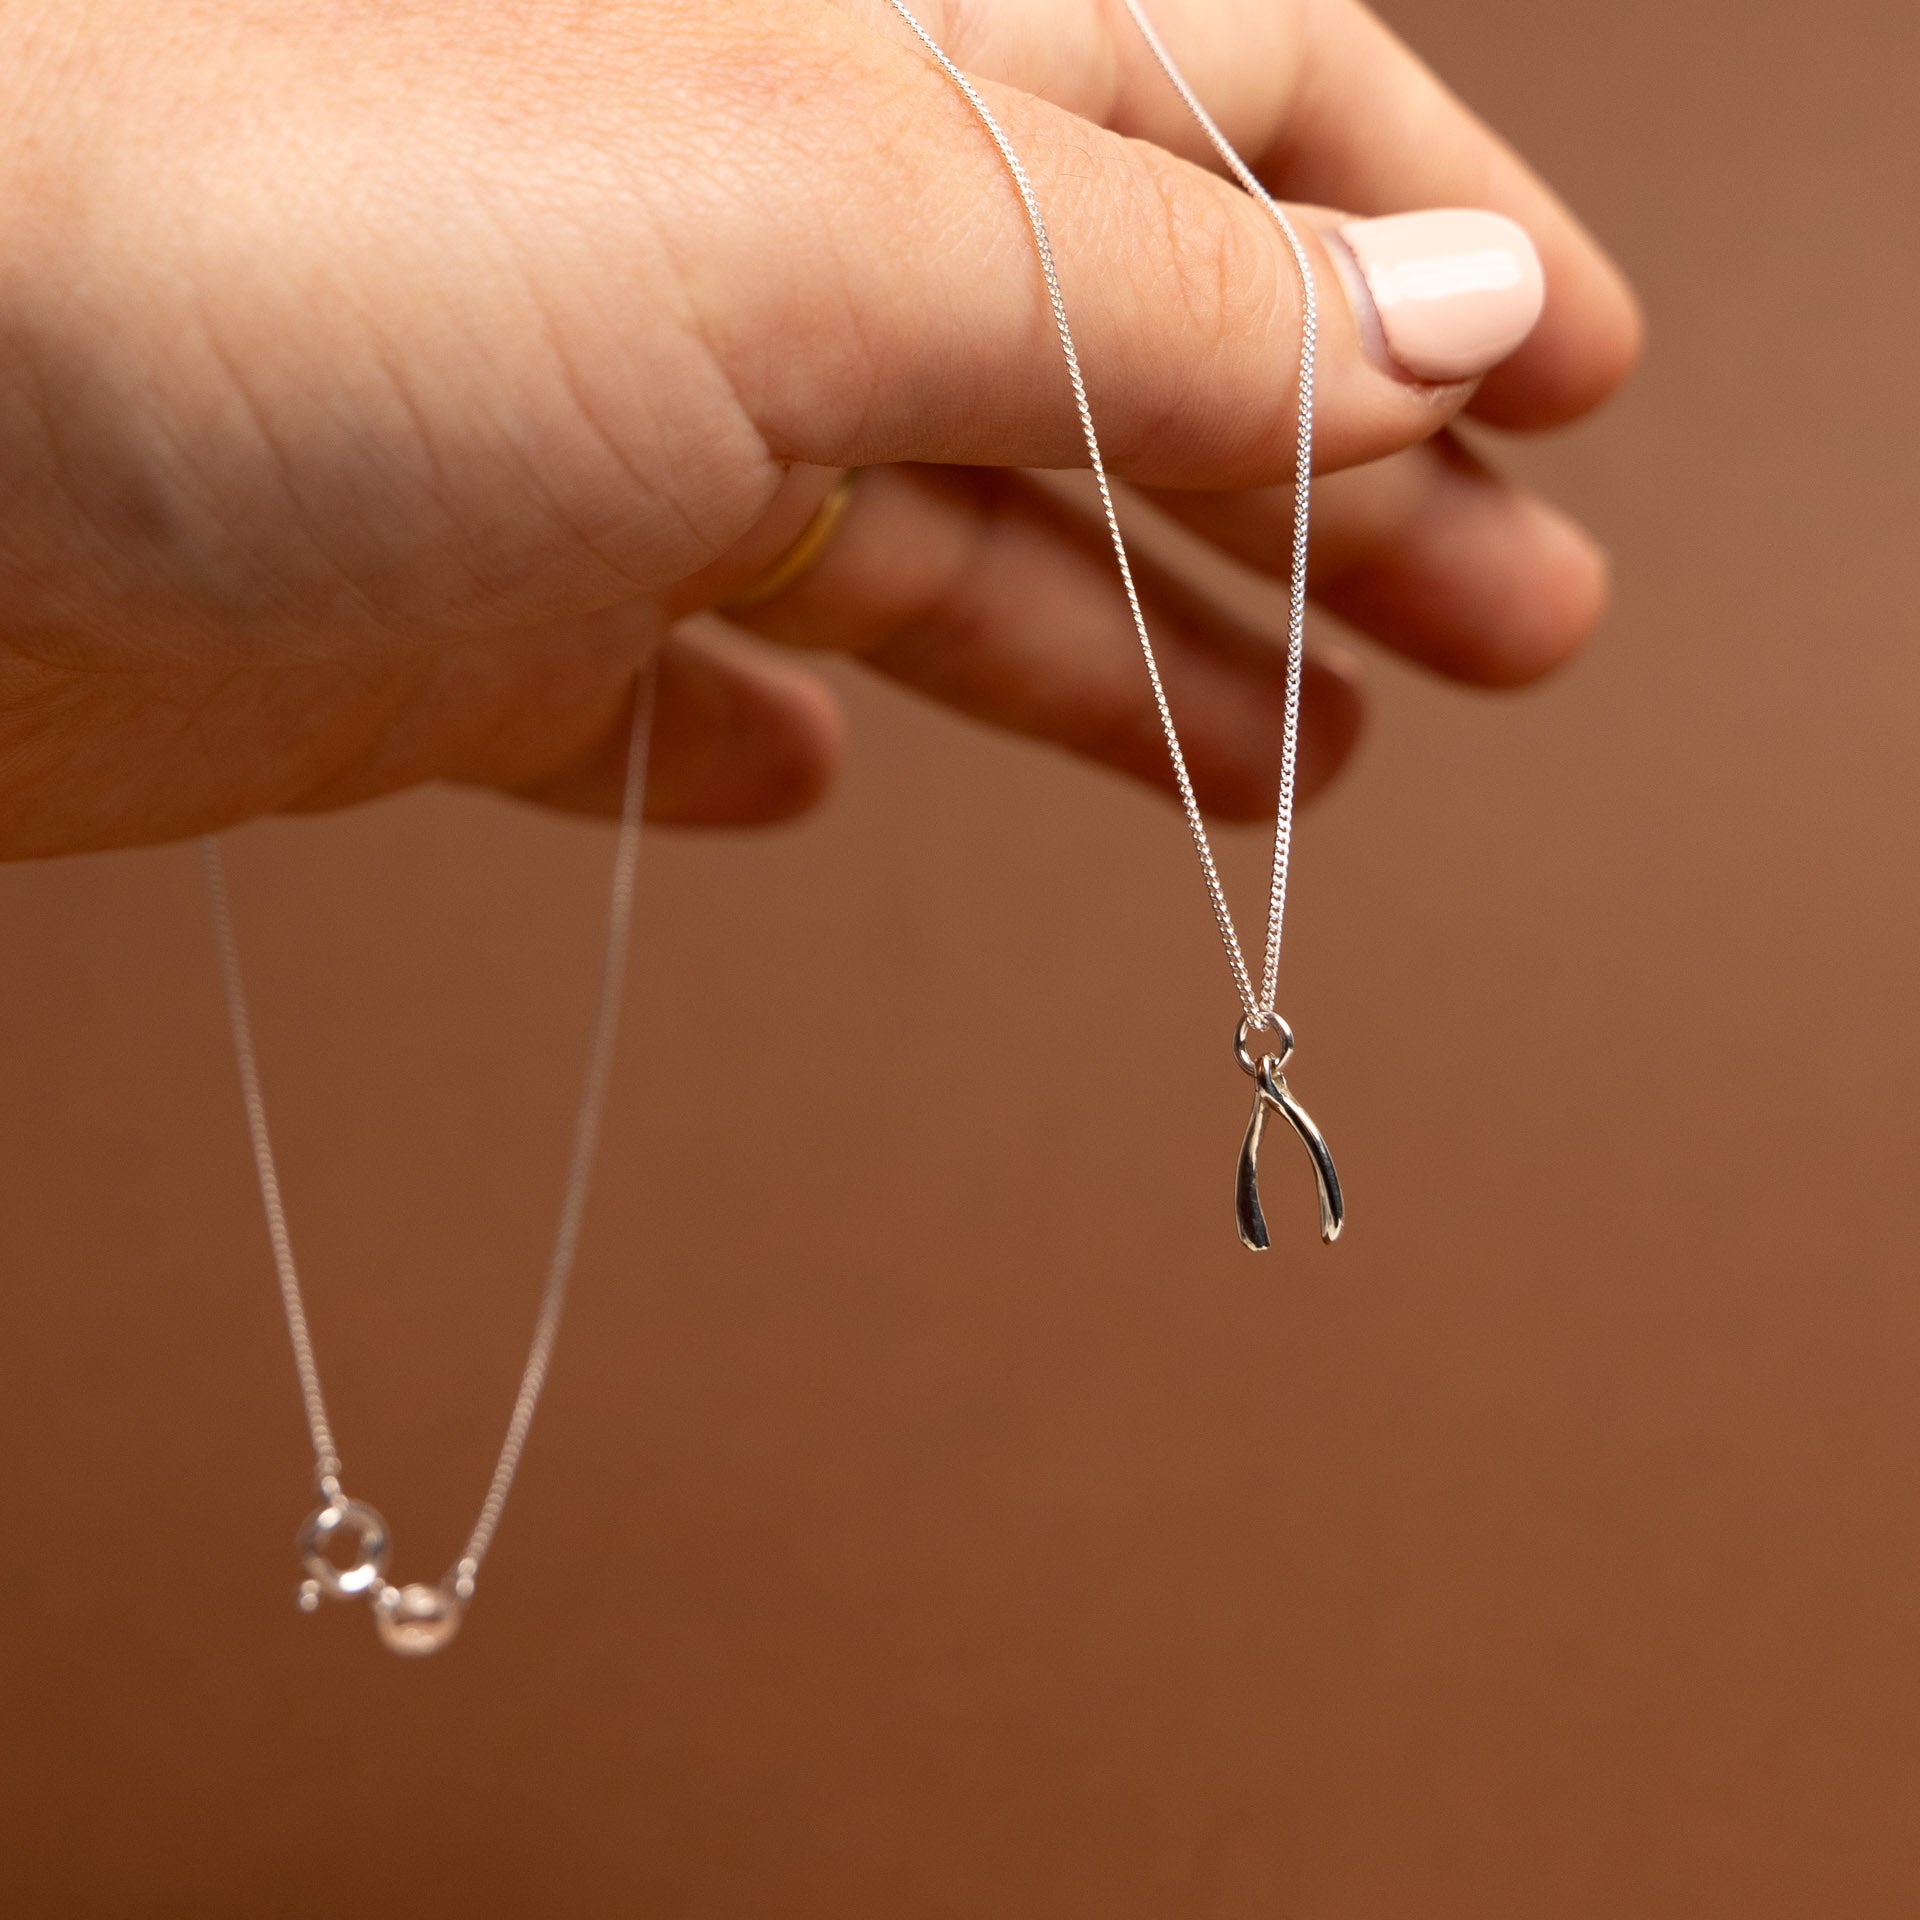 Dainty Wishbone Necklace - The Silver Seahorse